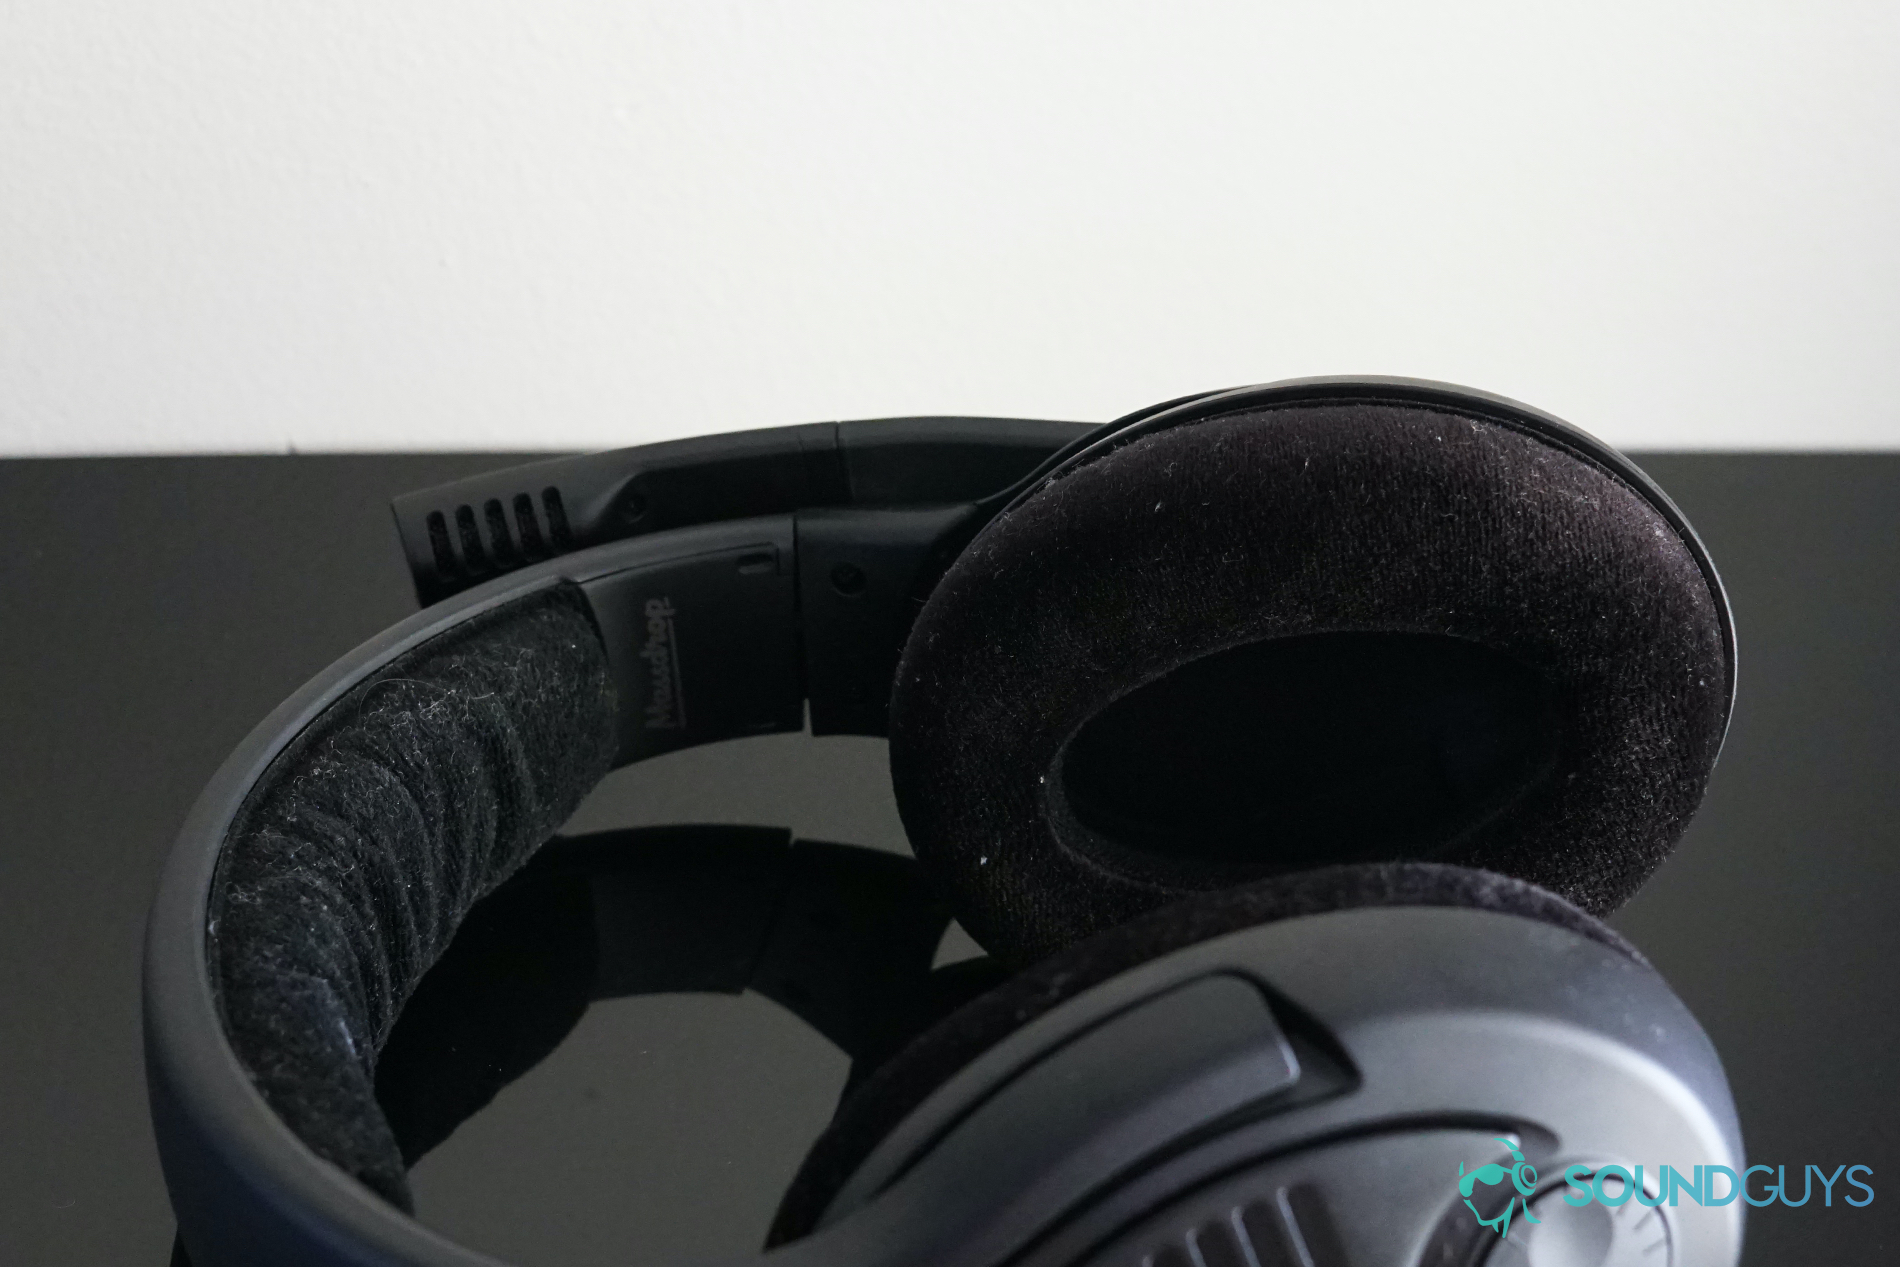 The Sennheiser PC37X lies on its side on a reflective black surface, with its microphone flipped up.